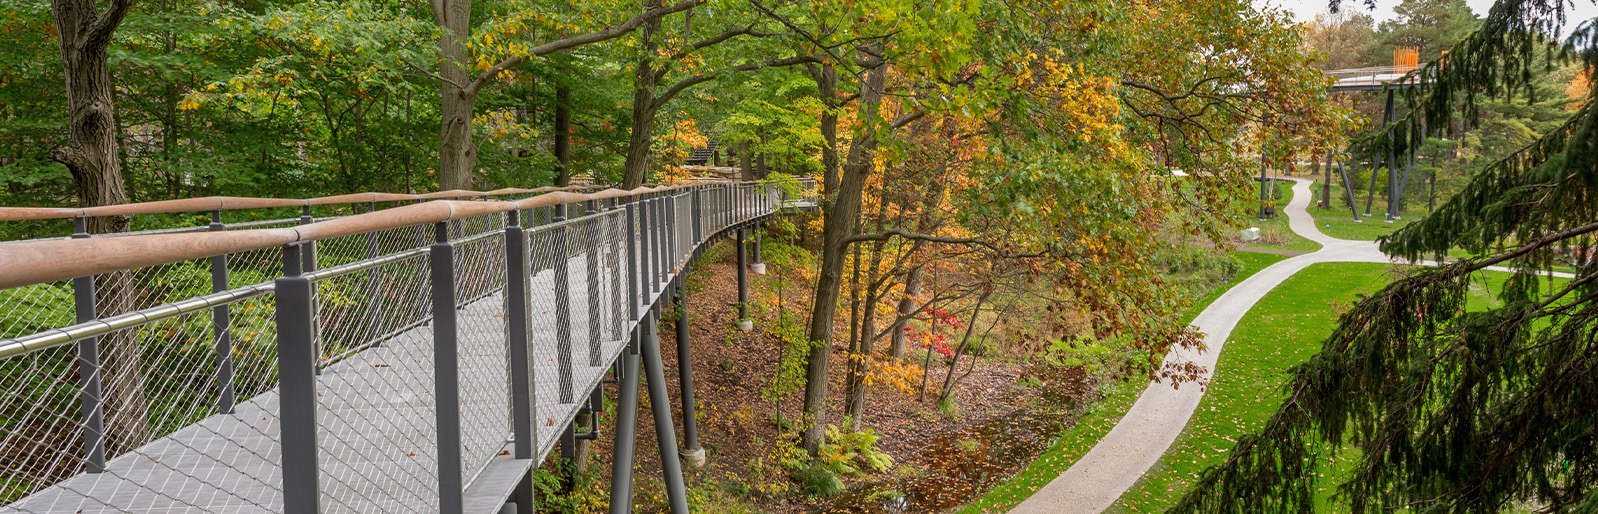 Whiting Forest Canopy Walk in Midland, Michigan